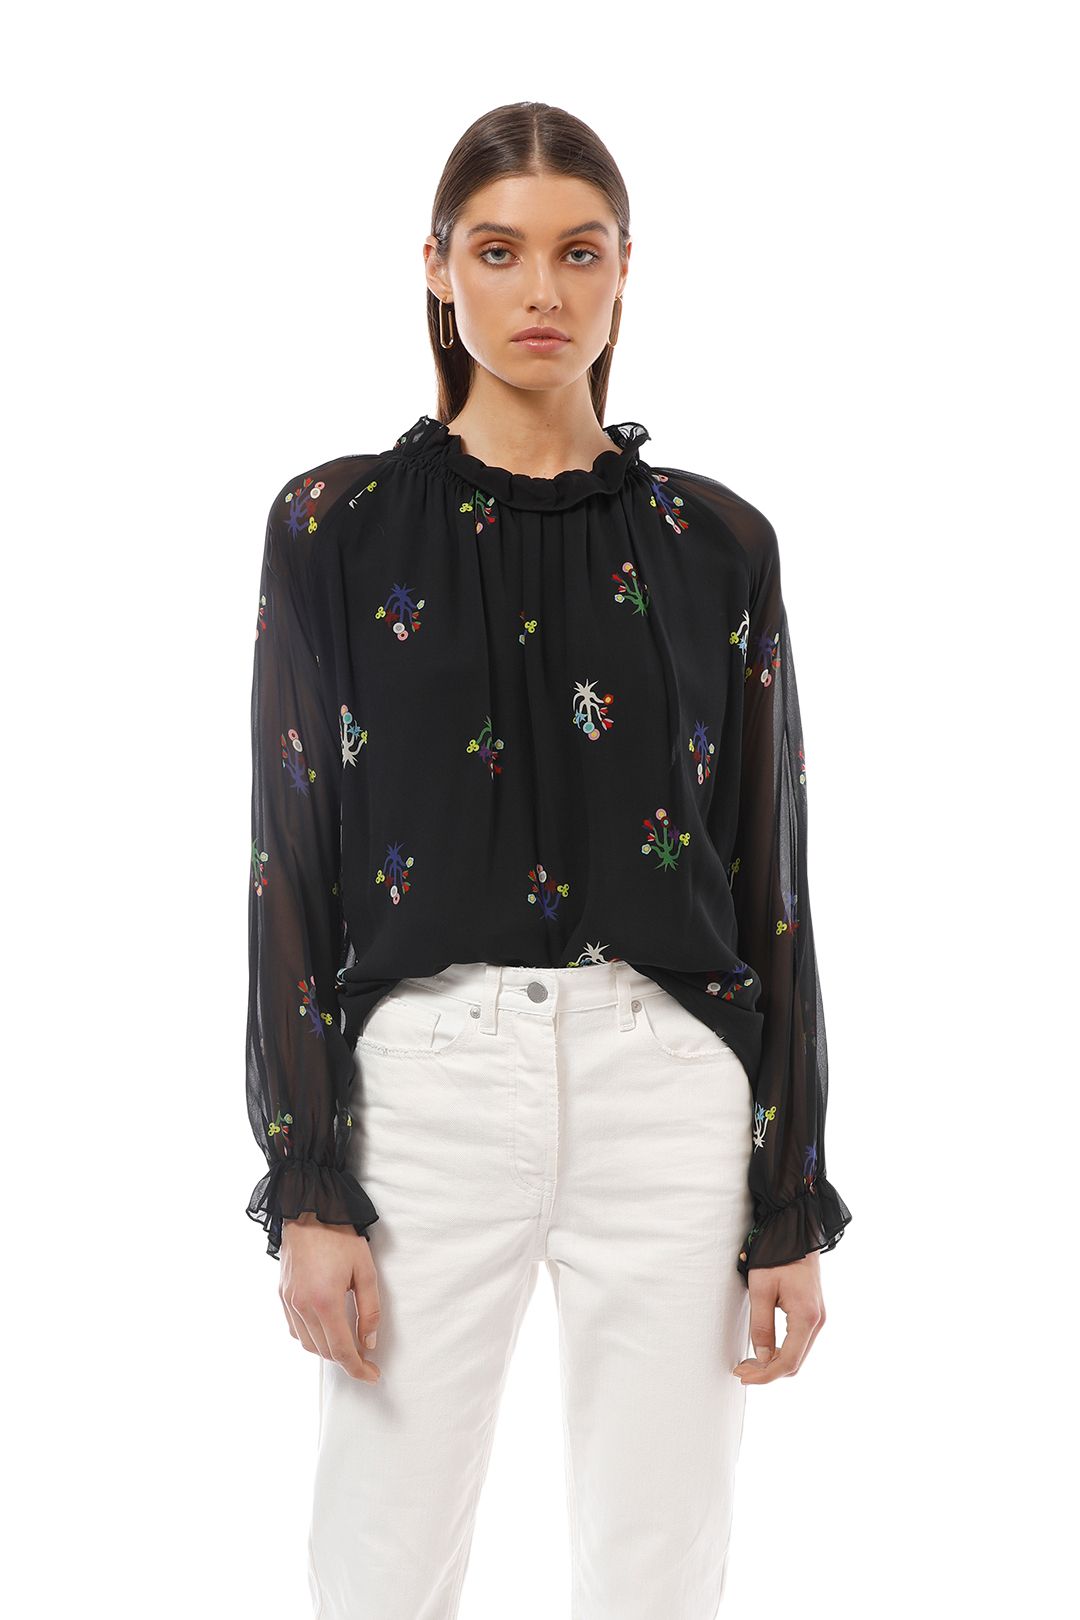 Cynthia Rowley - High Tide Smocked Ruffle Neck Top - Print - Front Crop